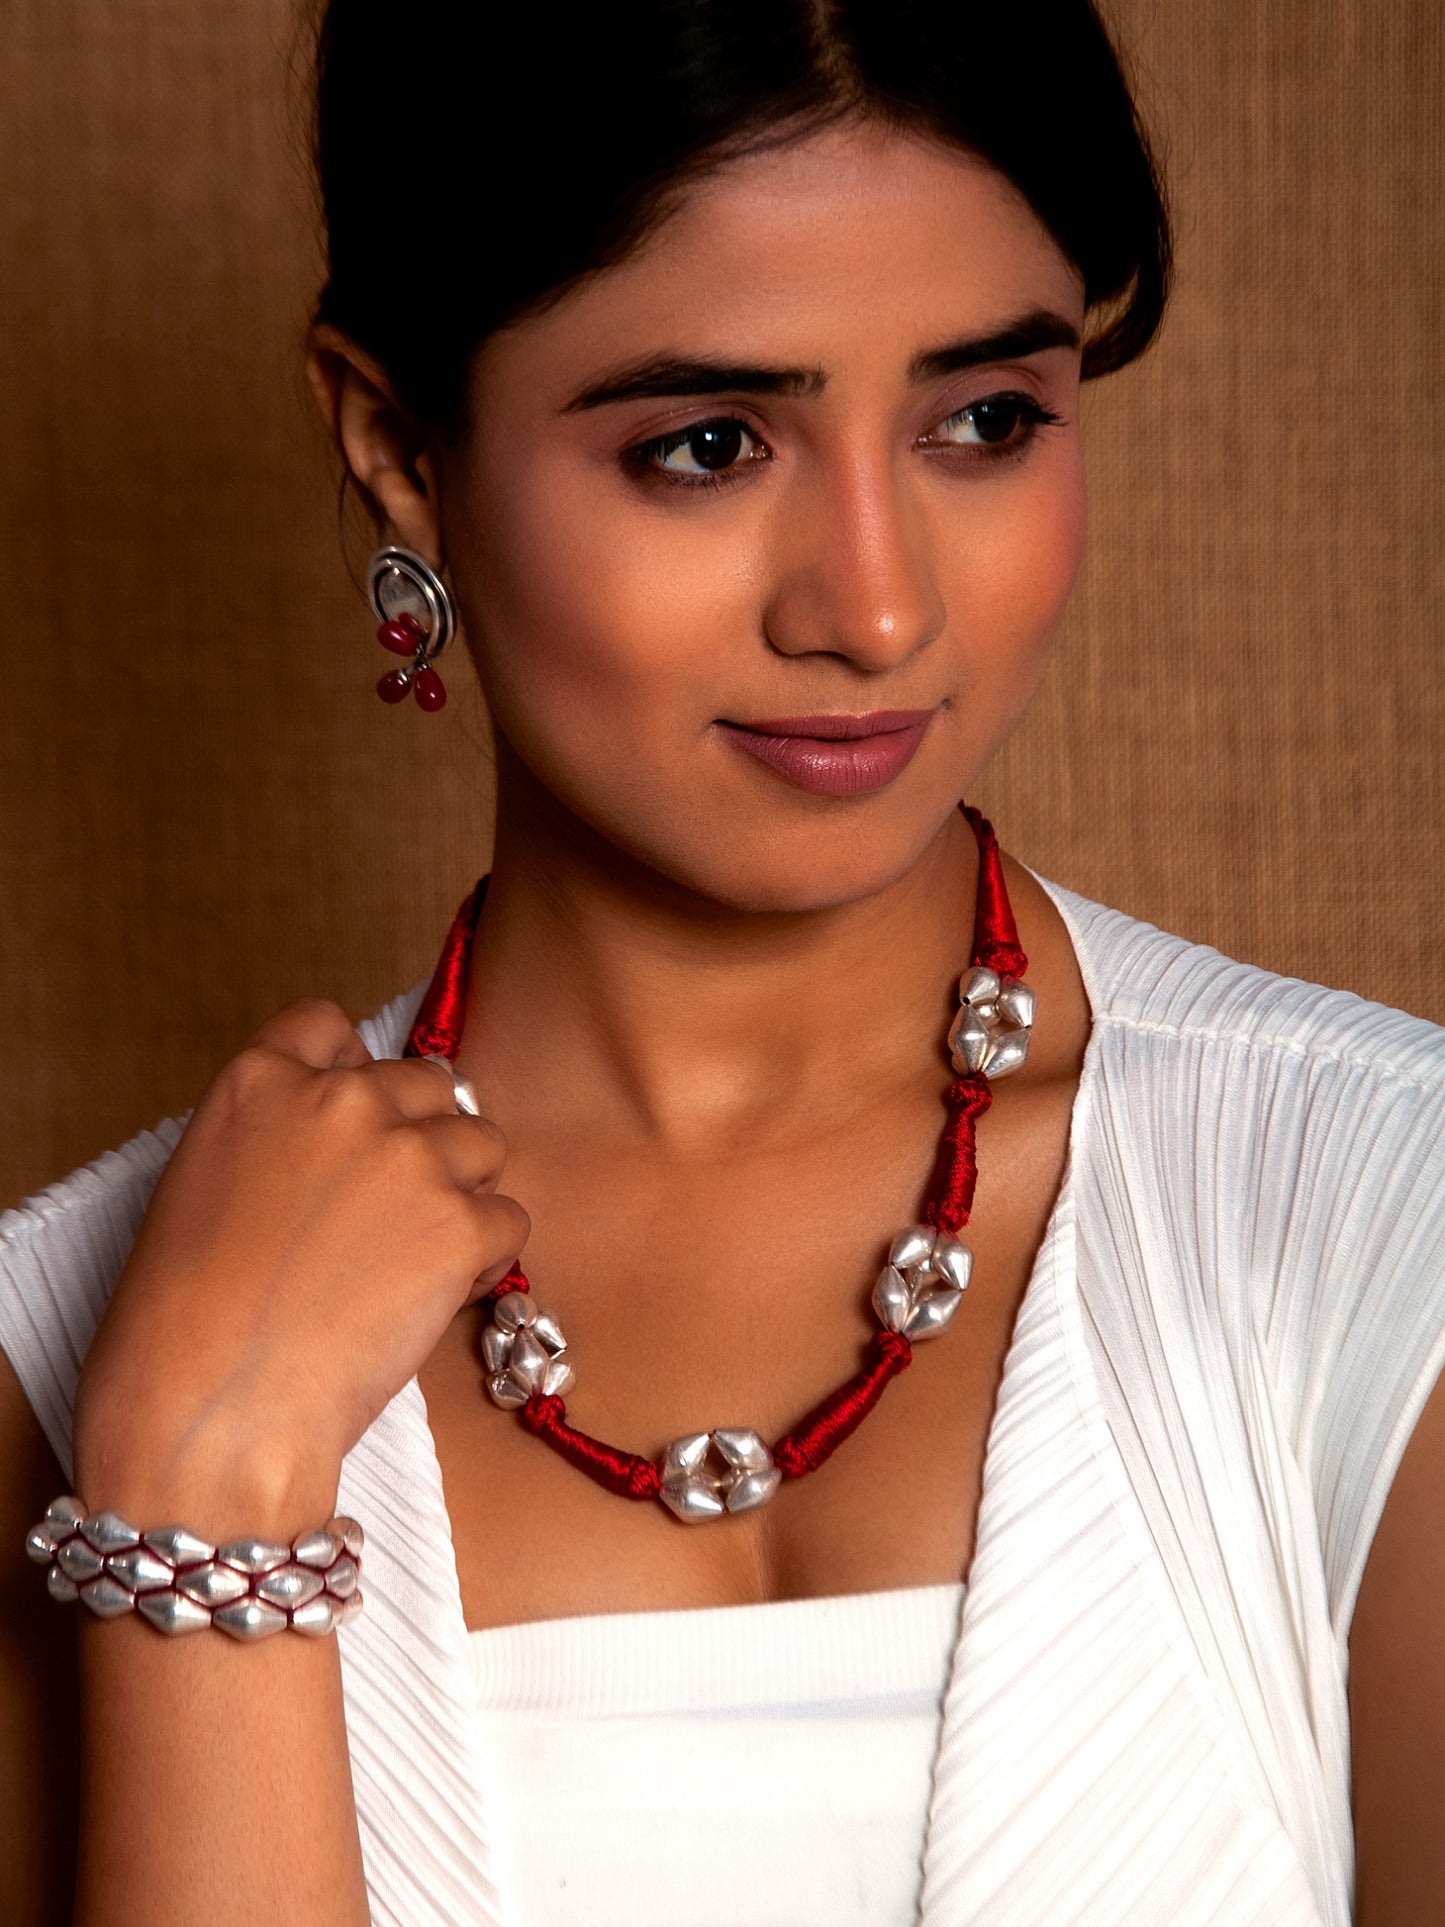 Dholki Bead Delight: 925 Silver Necklace with Red Silk Thread